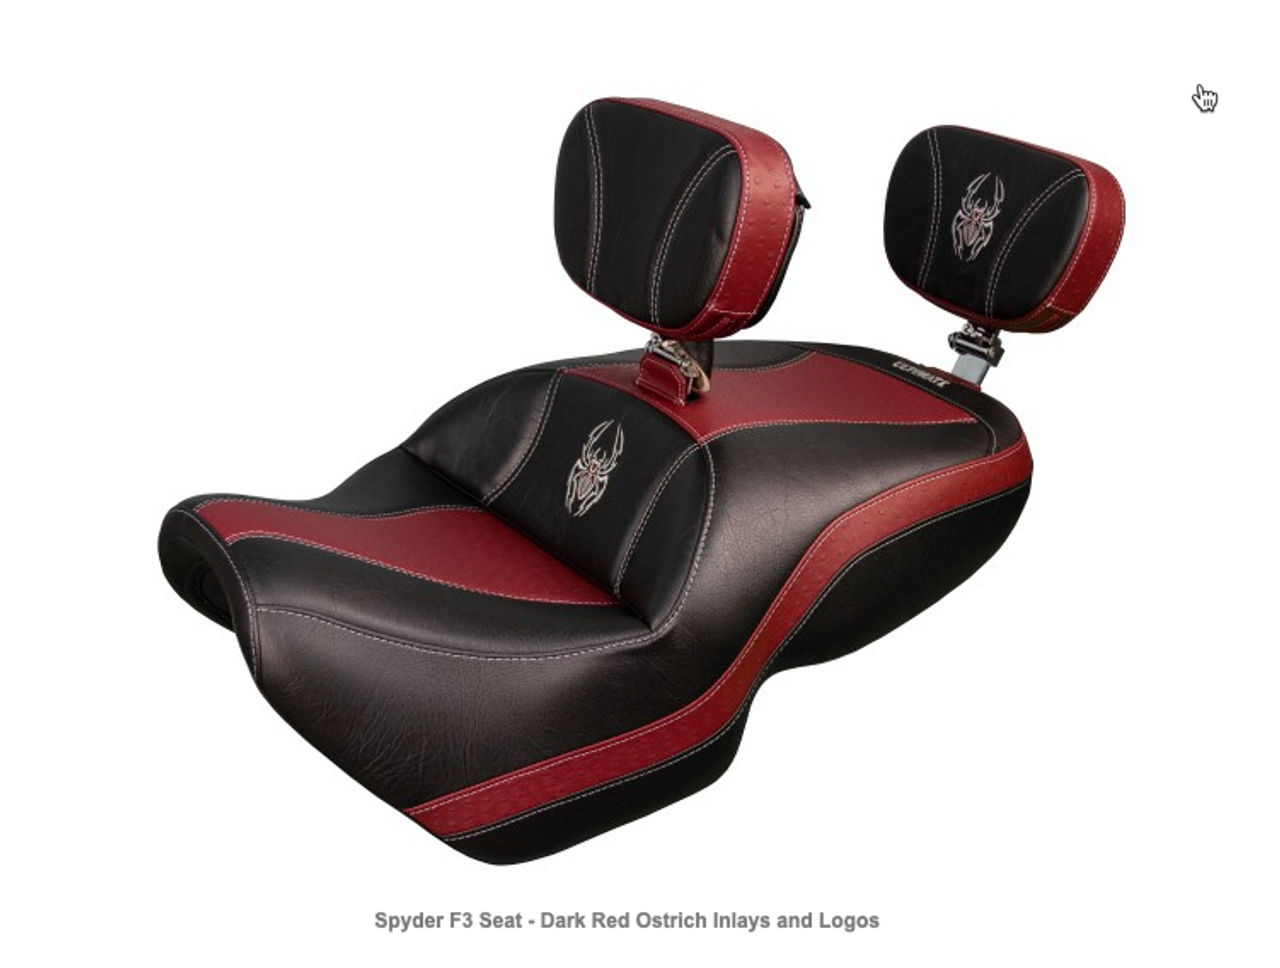 Ultimate Seat, Can Am Spyder F3 (2015 - Present)
Spyder F3 Seat - Dark Red Ostrich Inlays and Logos